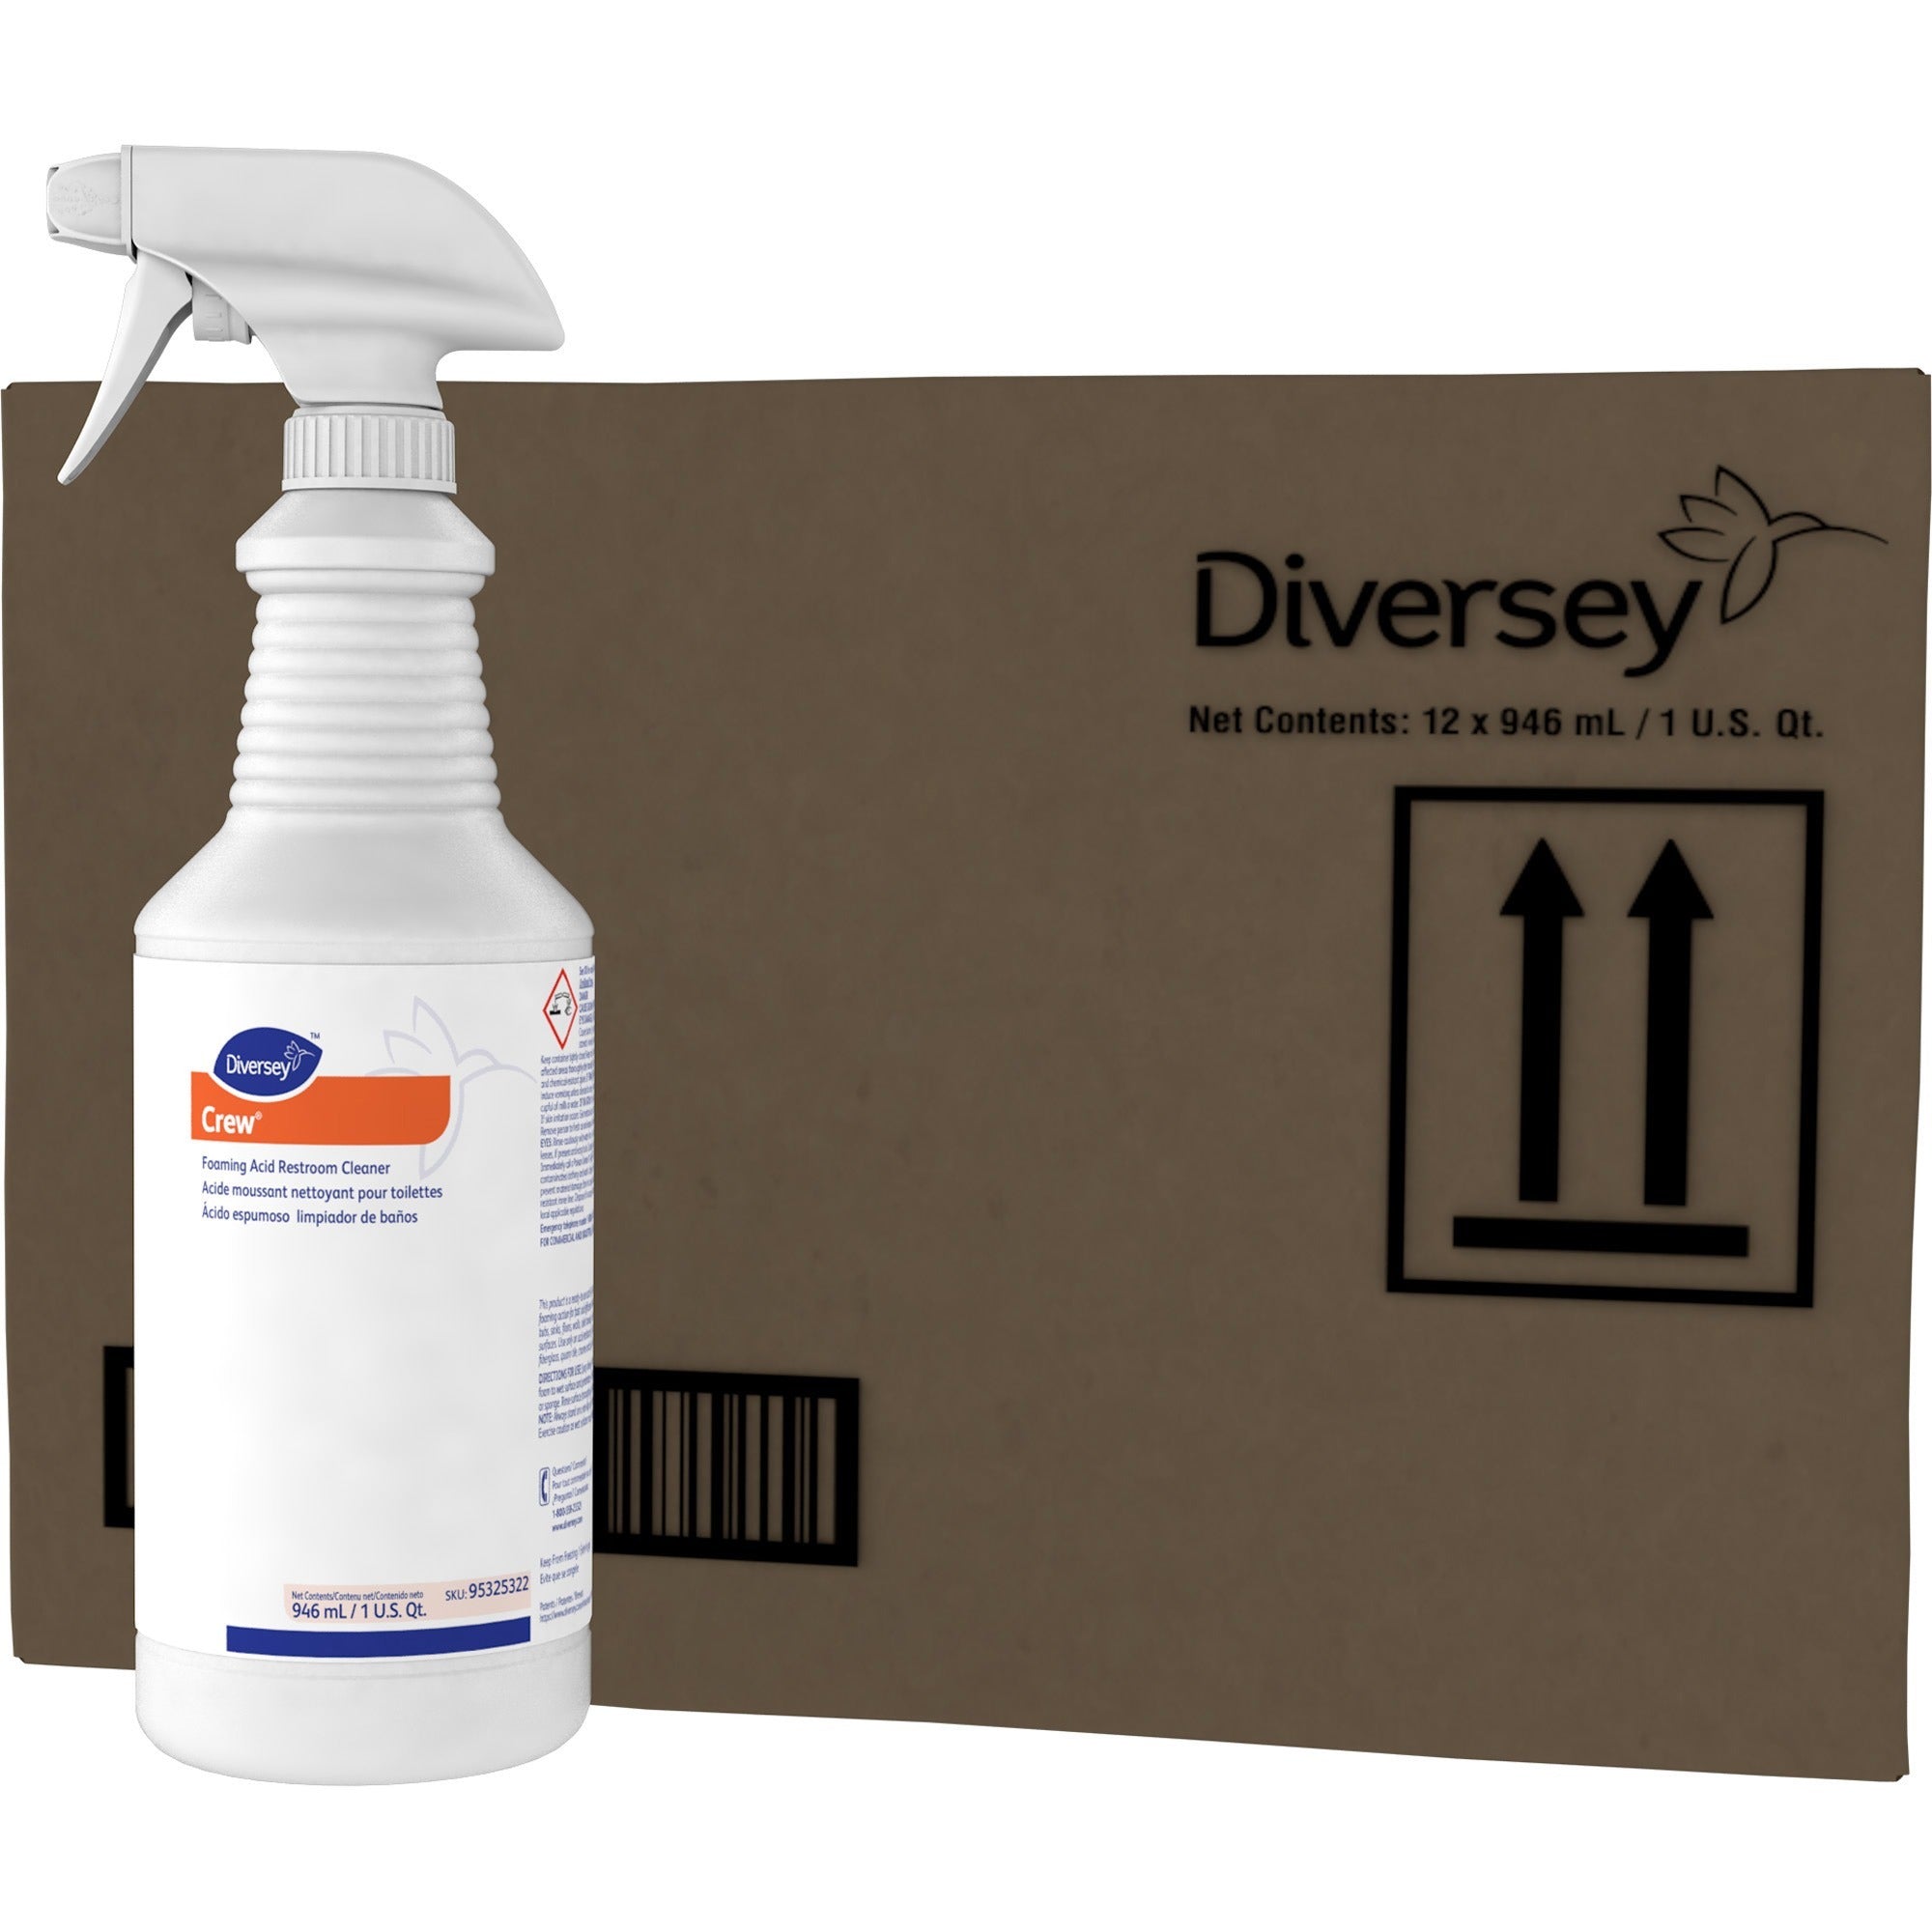 diversey-foaming-acid-restroom-cleaner-ready-to-use-32-fl-oz-1-quart-fresh-scent-12-carton-strong-red_dvo95325322ct - 1